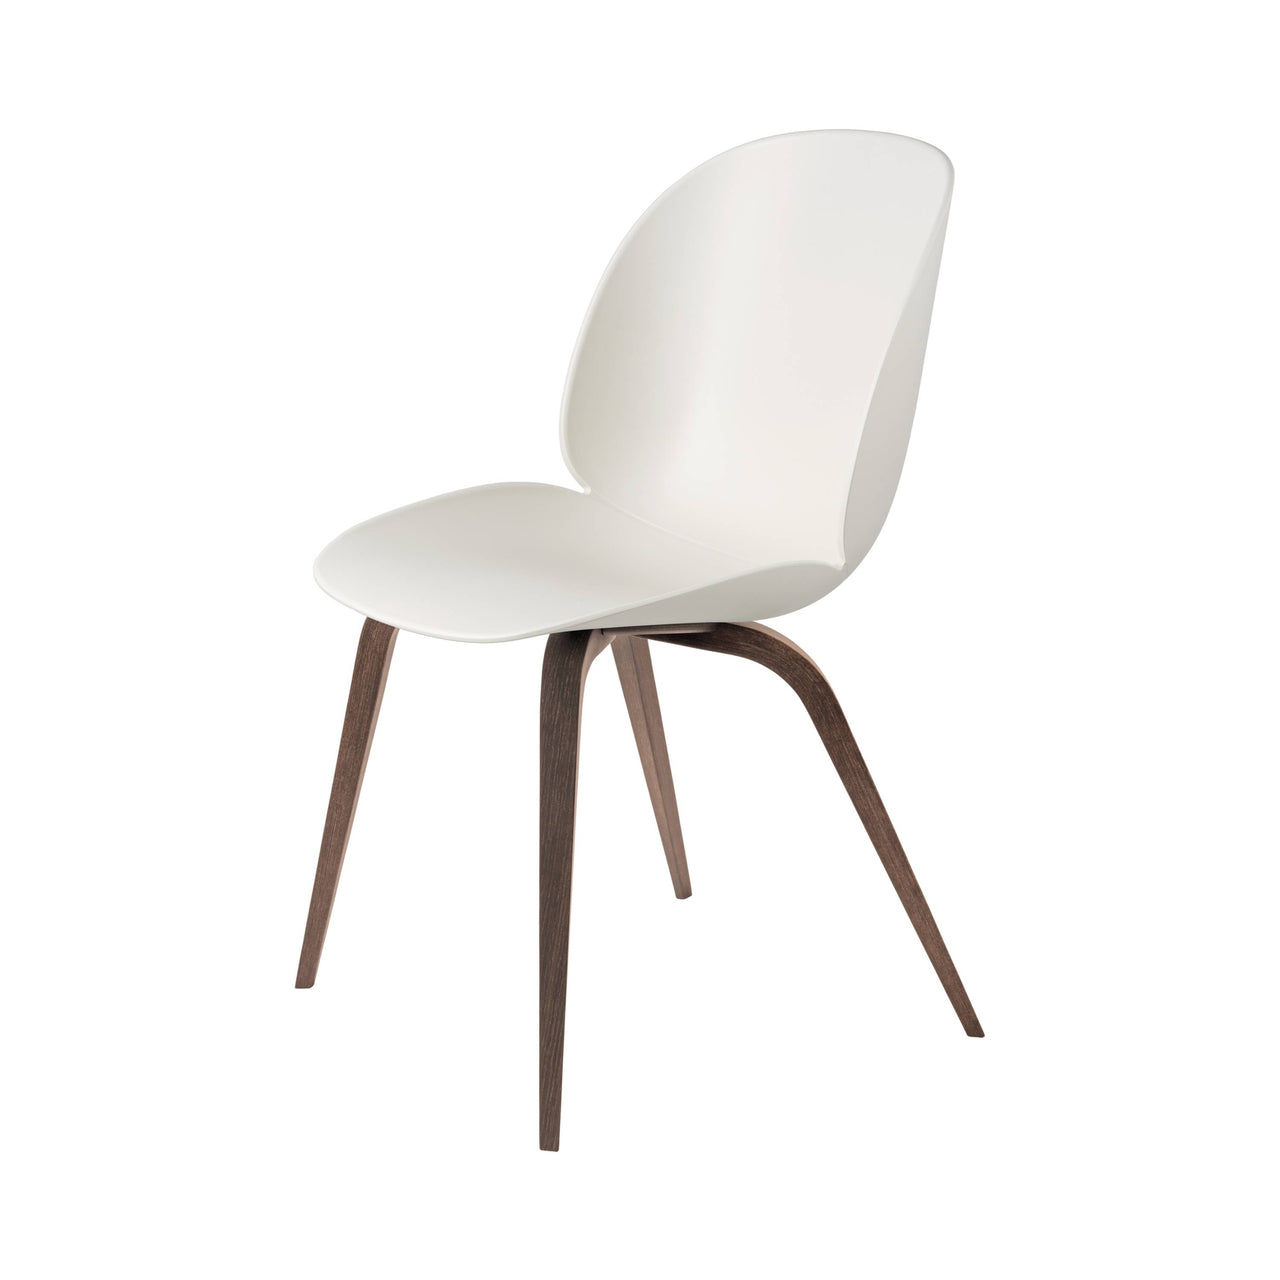 Beetle Dining Chair: Wood Base + Alabaster White + American Walnut + Plastic Glides